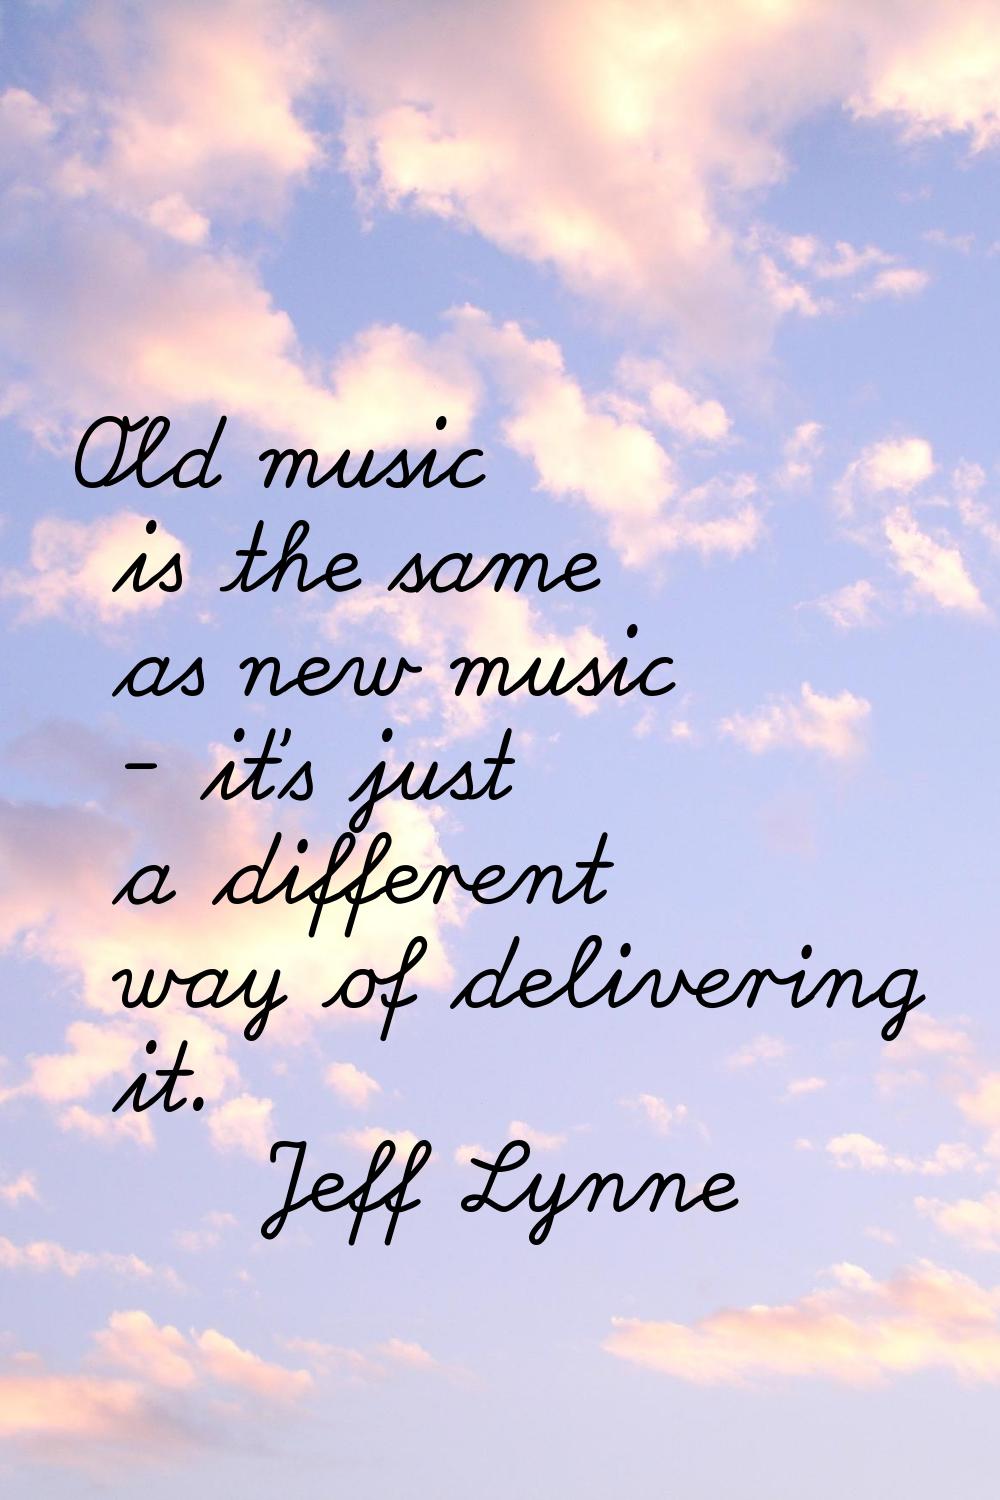 Old music is the same as new music - it's just a different way of delivering it.